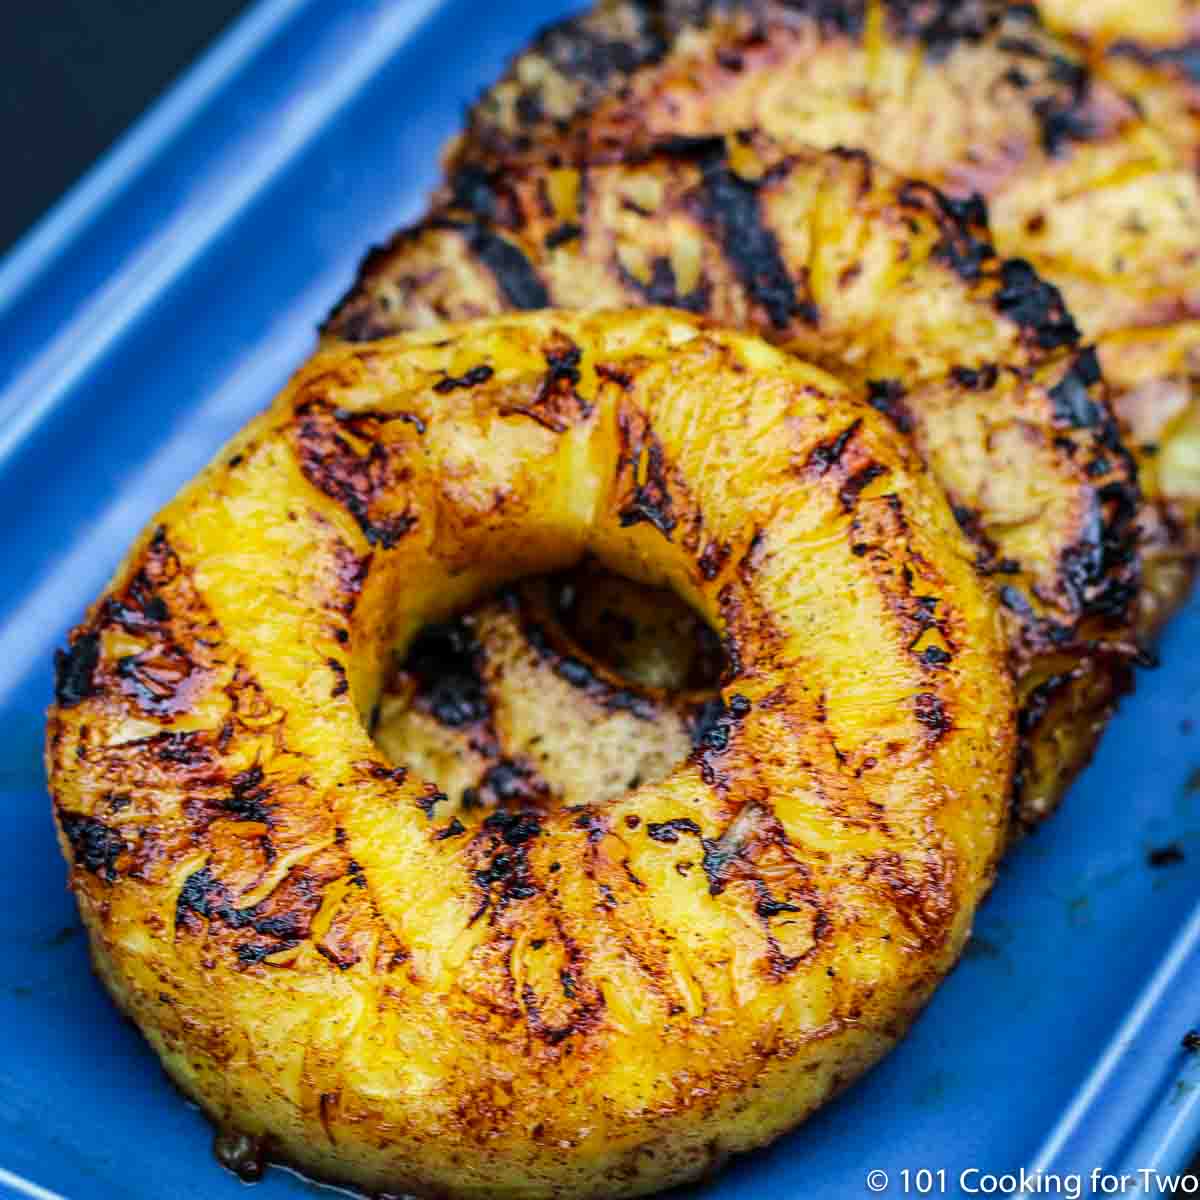 Grilled Pineapple Desserts - How to Make the Best Grilled Pineapple Desserts